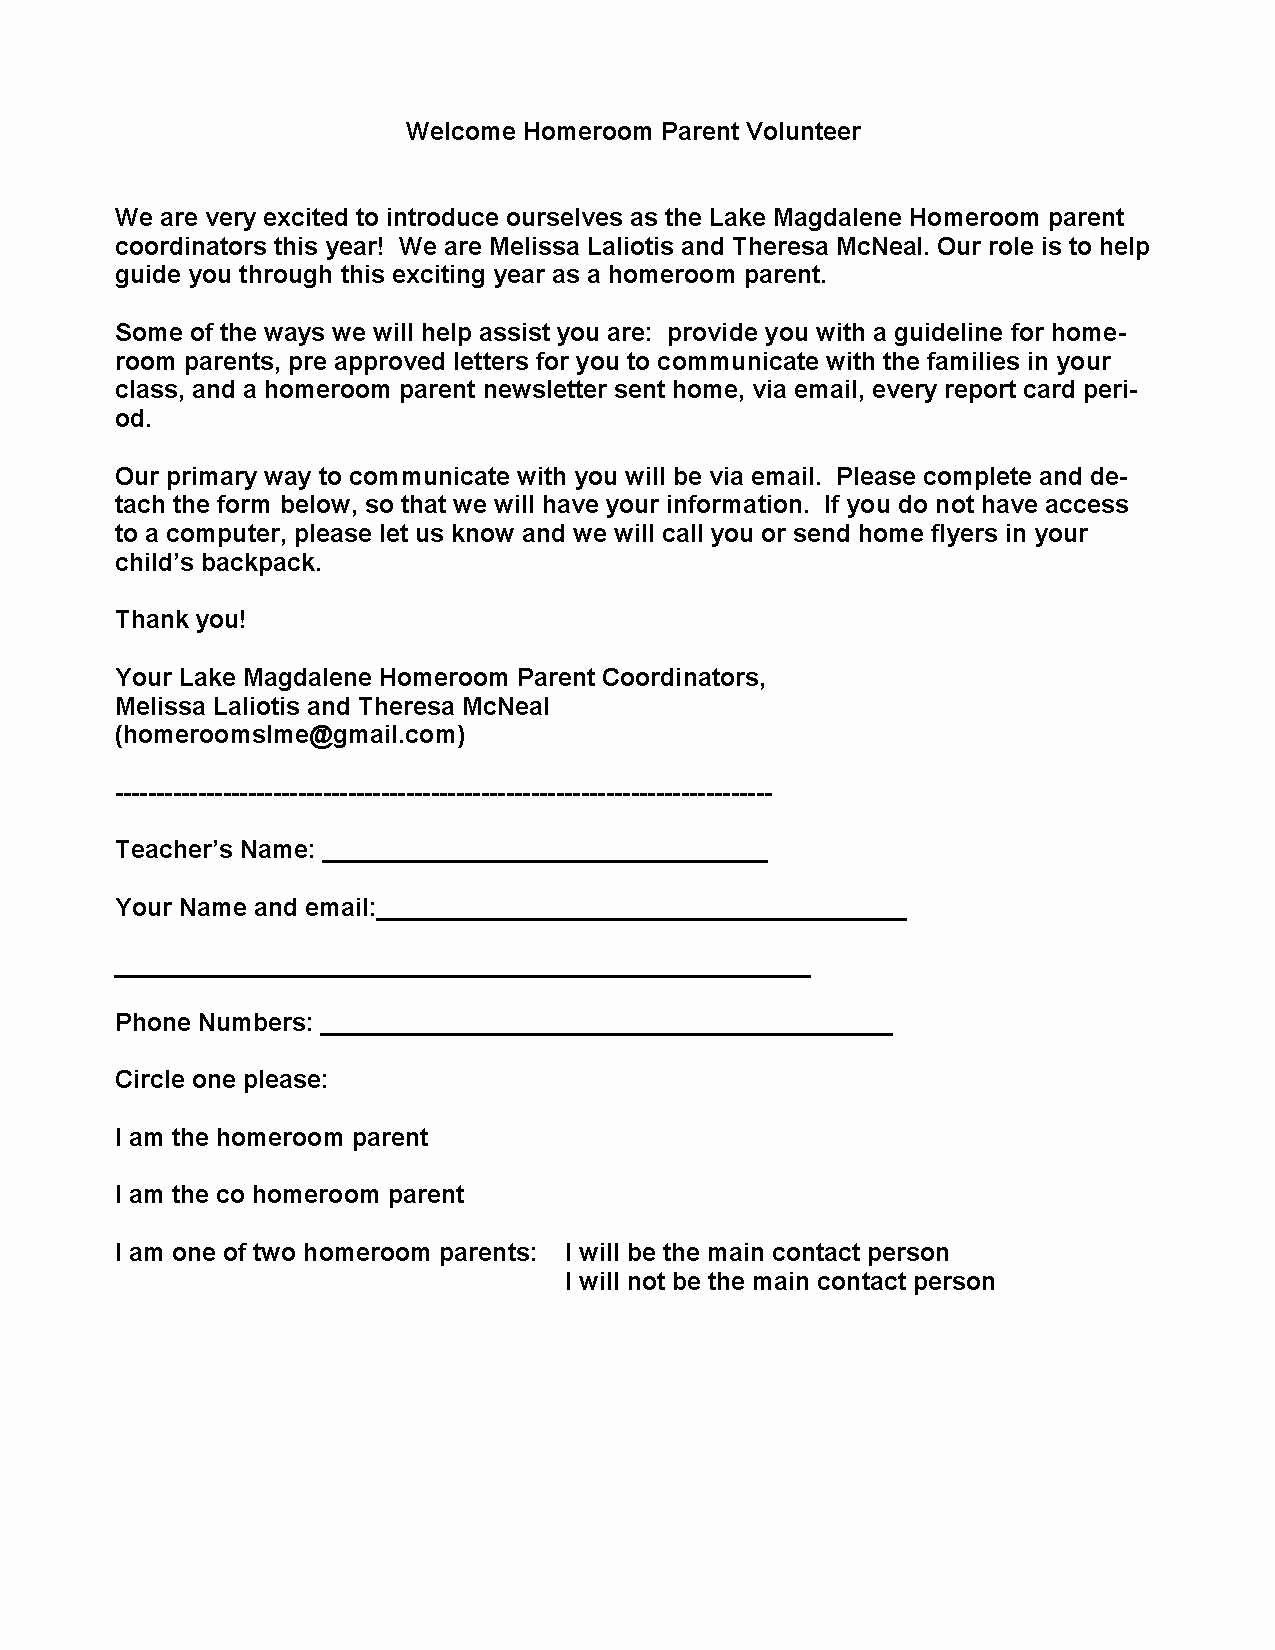 Simple Home Purchase Agreement 37 Inspirational Simple Mobile Home Purchase Agreement Fr Planen